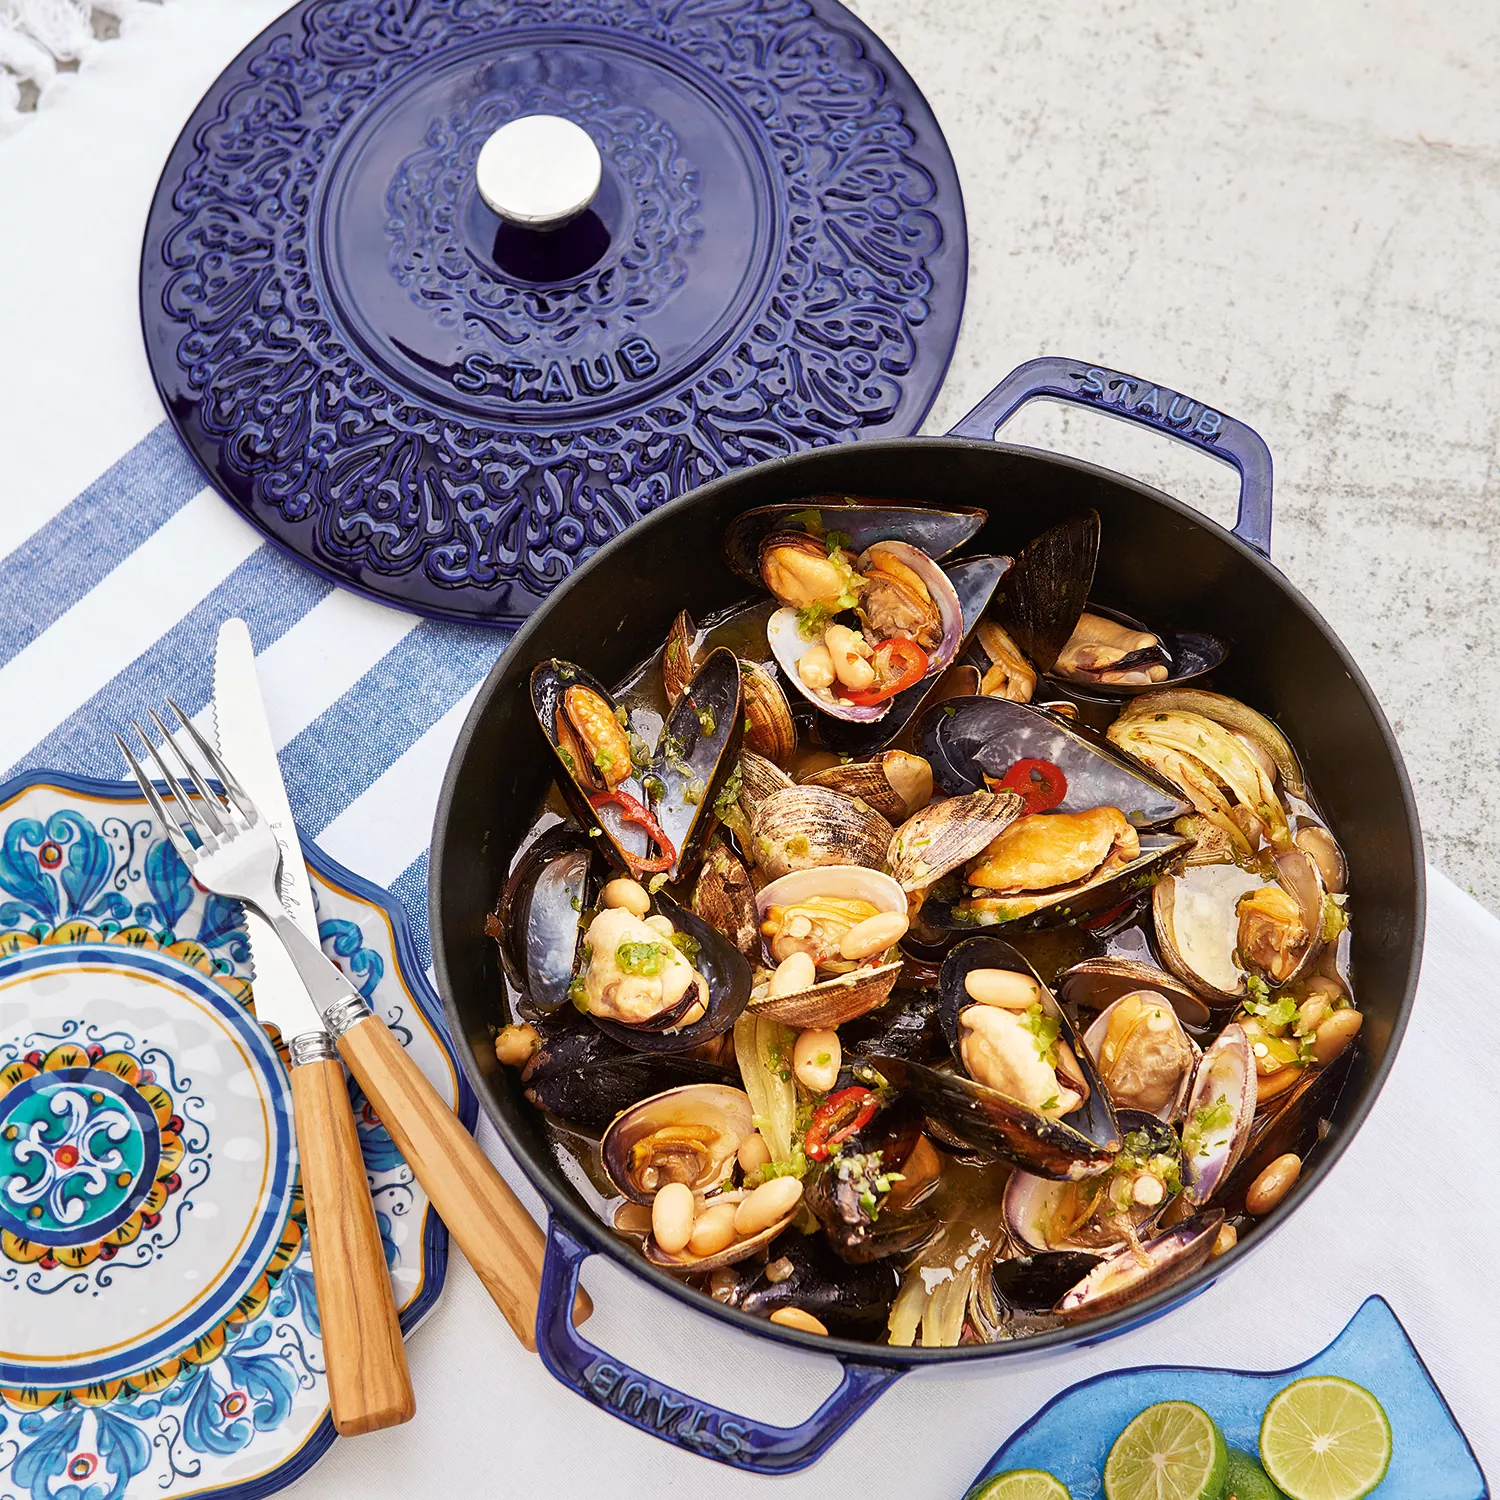 Today's the Last Day To Get a Staub Cocotte for $100 at Sur La Table